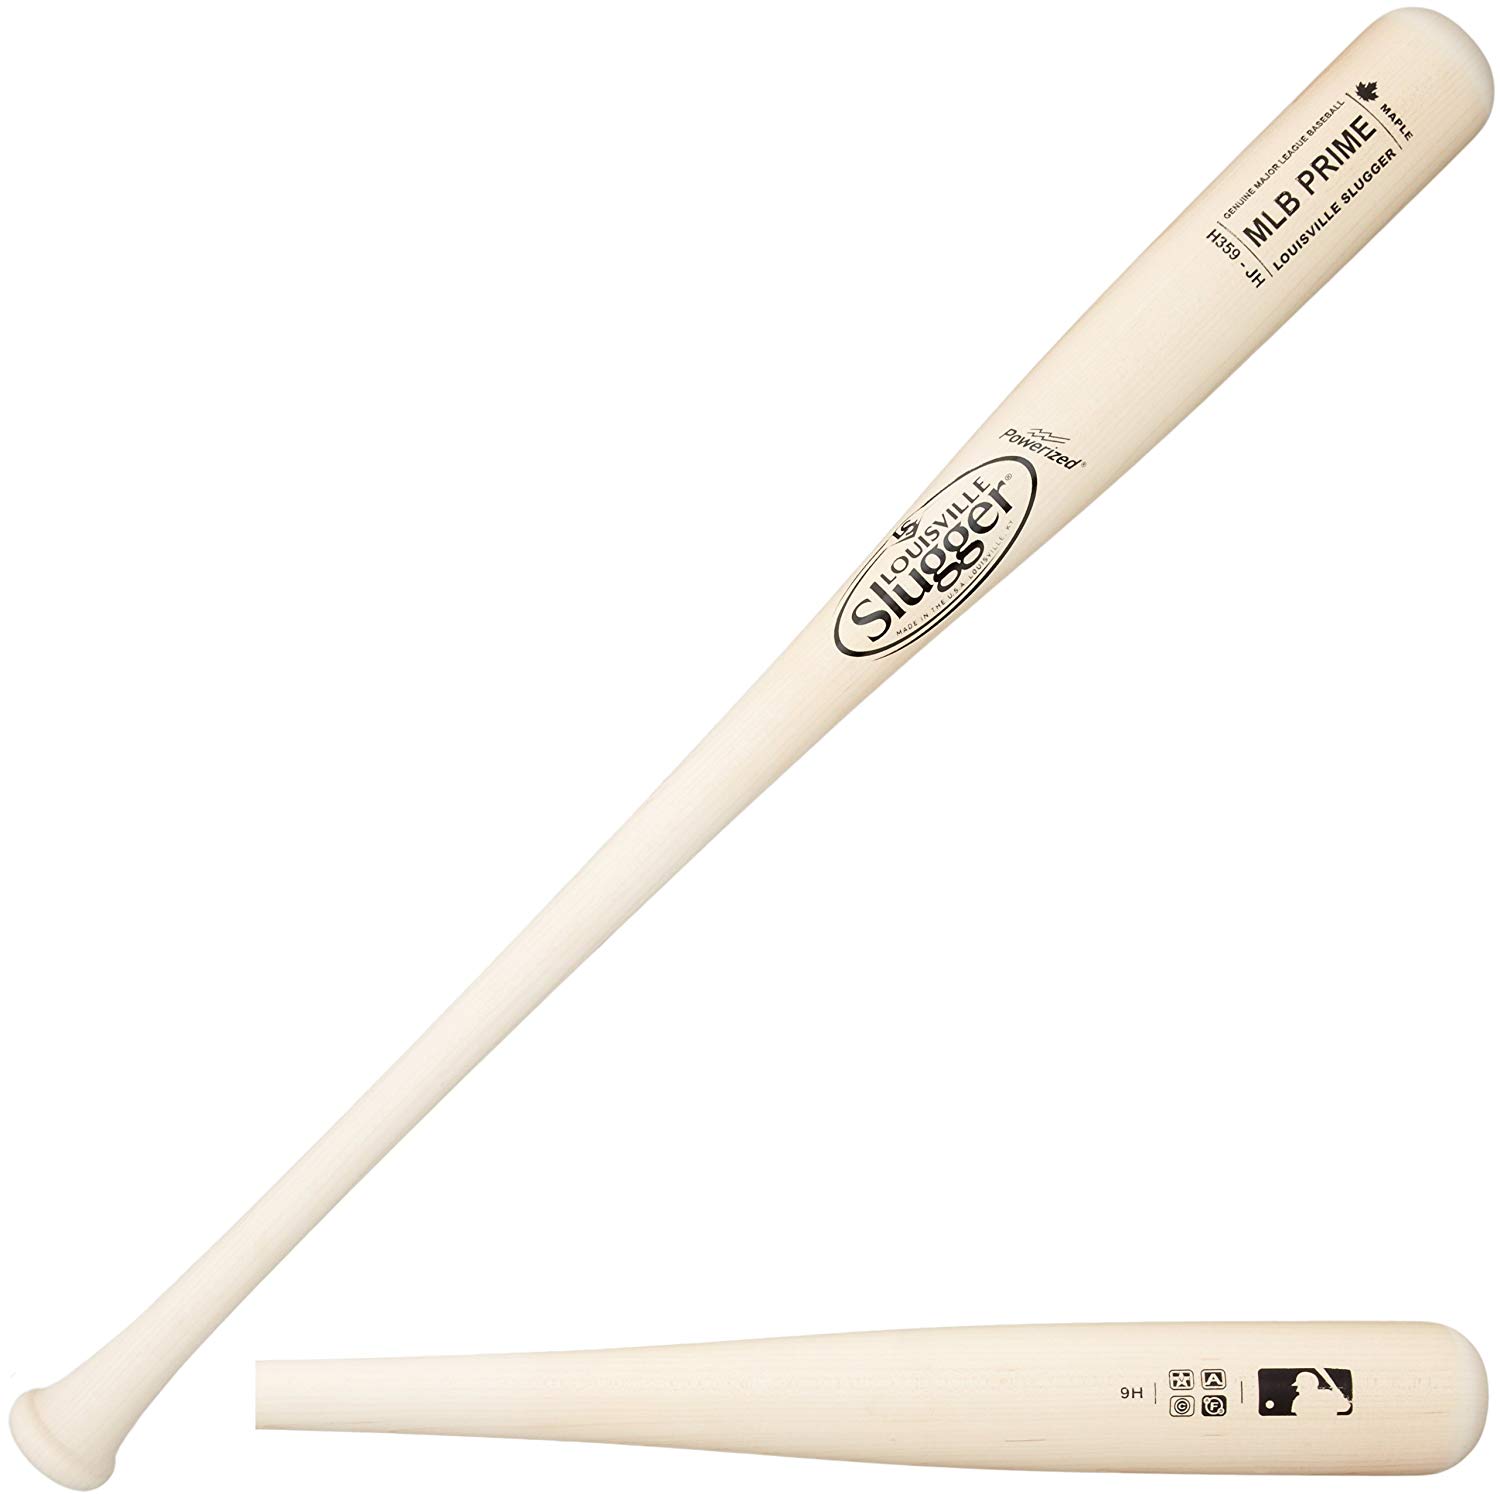 Turning model H359 is swung by Josh Hamilton MLB high-quality, veneer maple wood construction Amish Vacuum Drying process and Finishing System (AFS) guarantees Slugger's hardest wood 360 degree wood compression is better than bone rubbing and won't miss a soft spot MLB Ink Dot guarantees the straightest grain and hardest pro-grade wood bat.